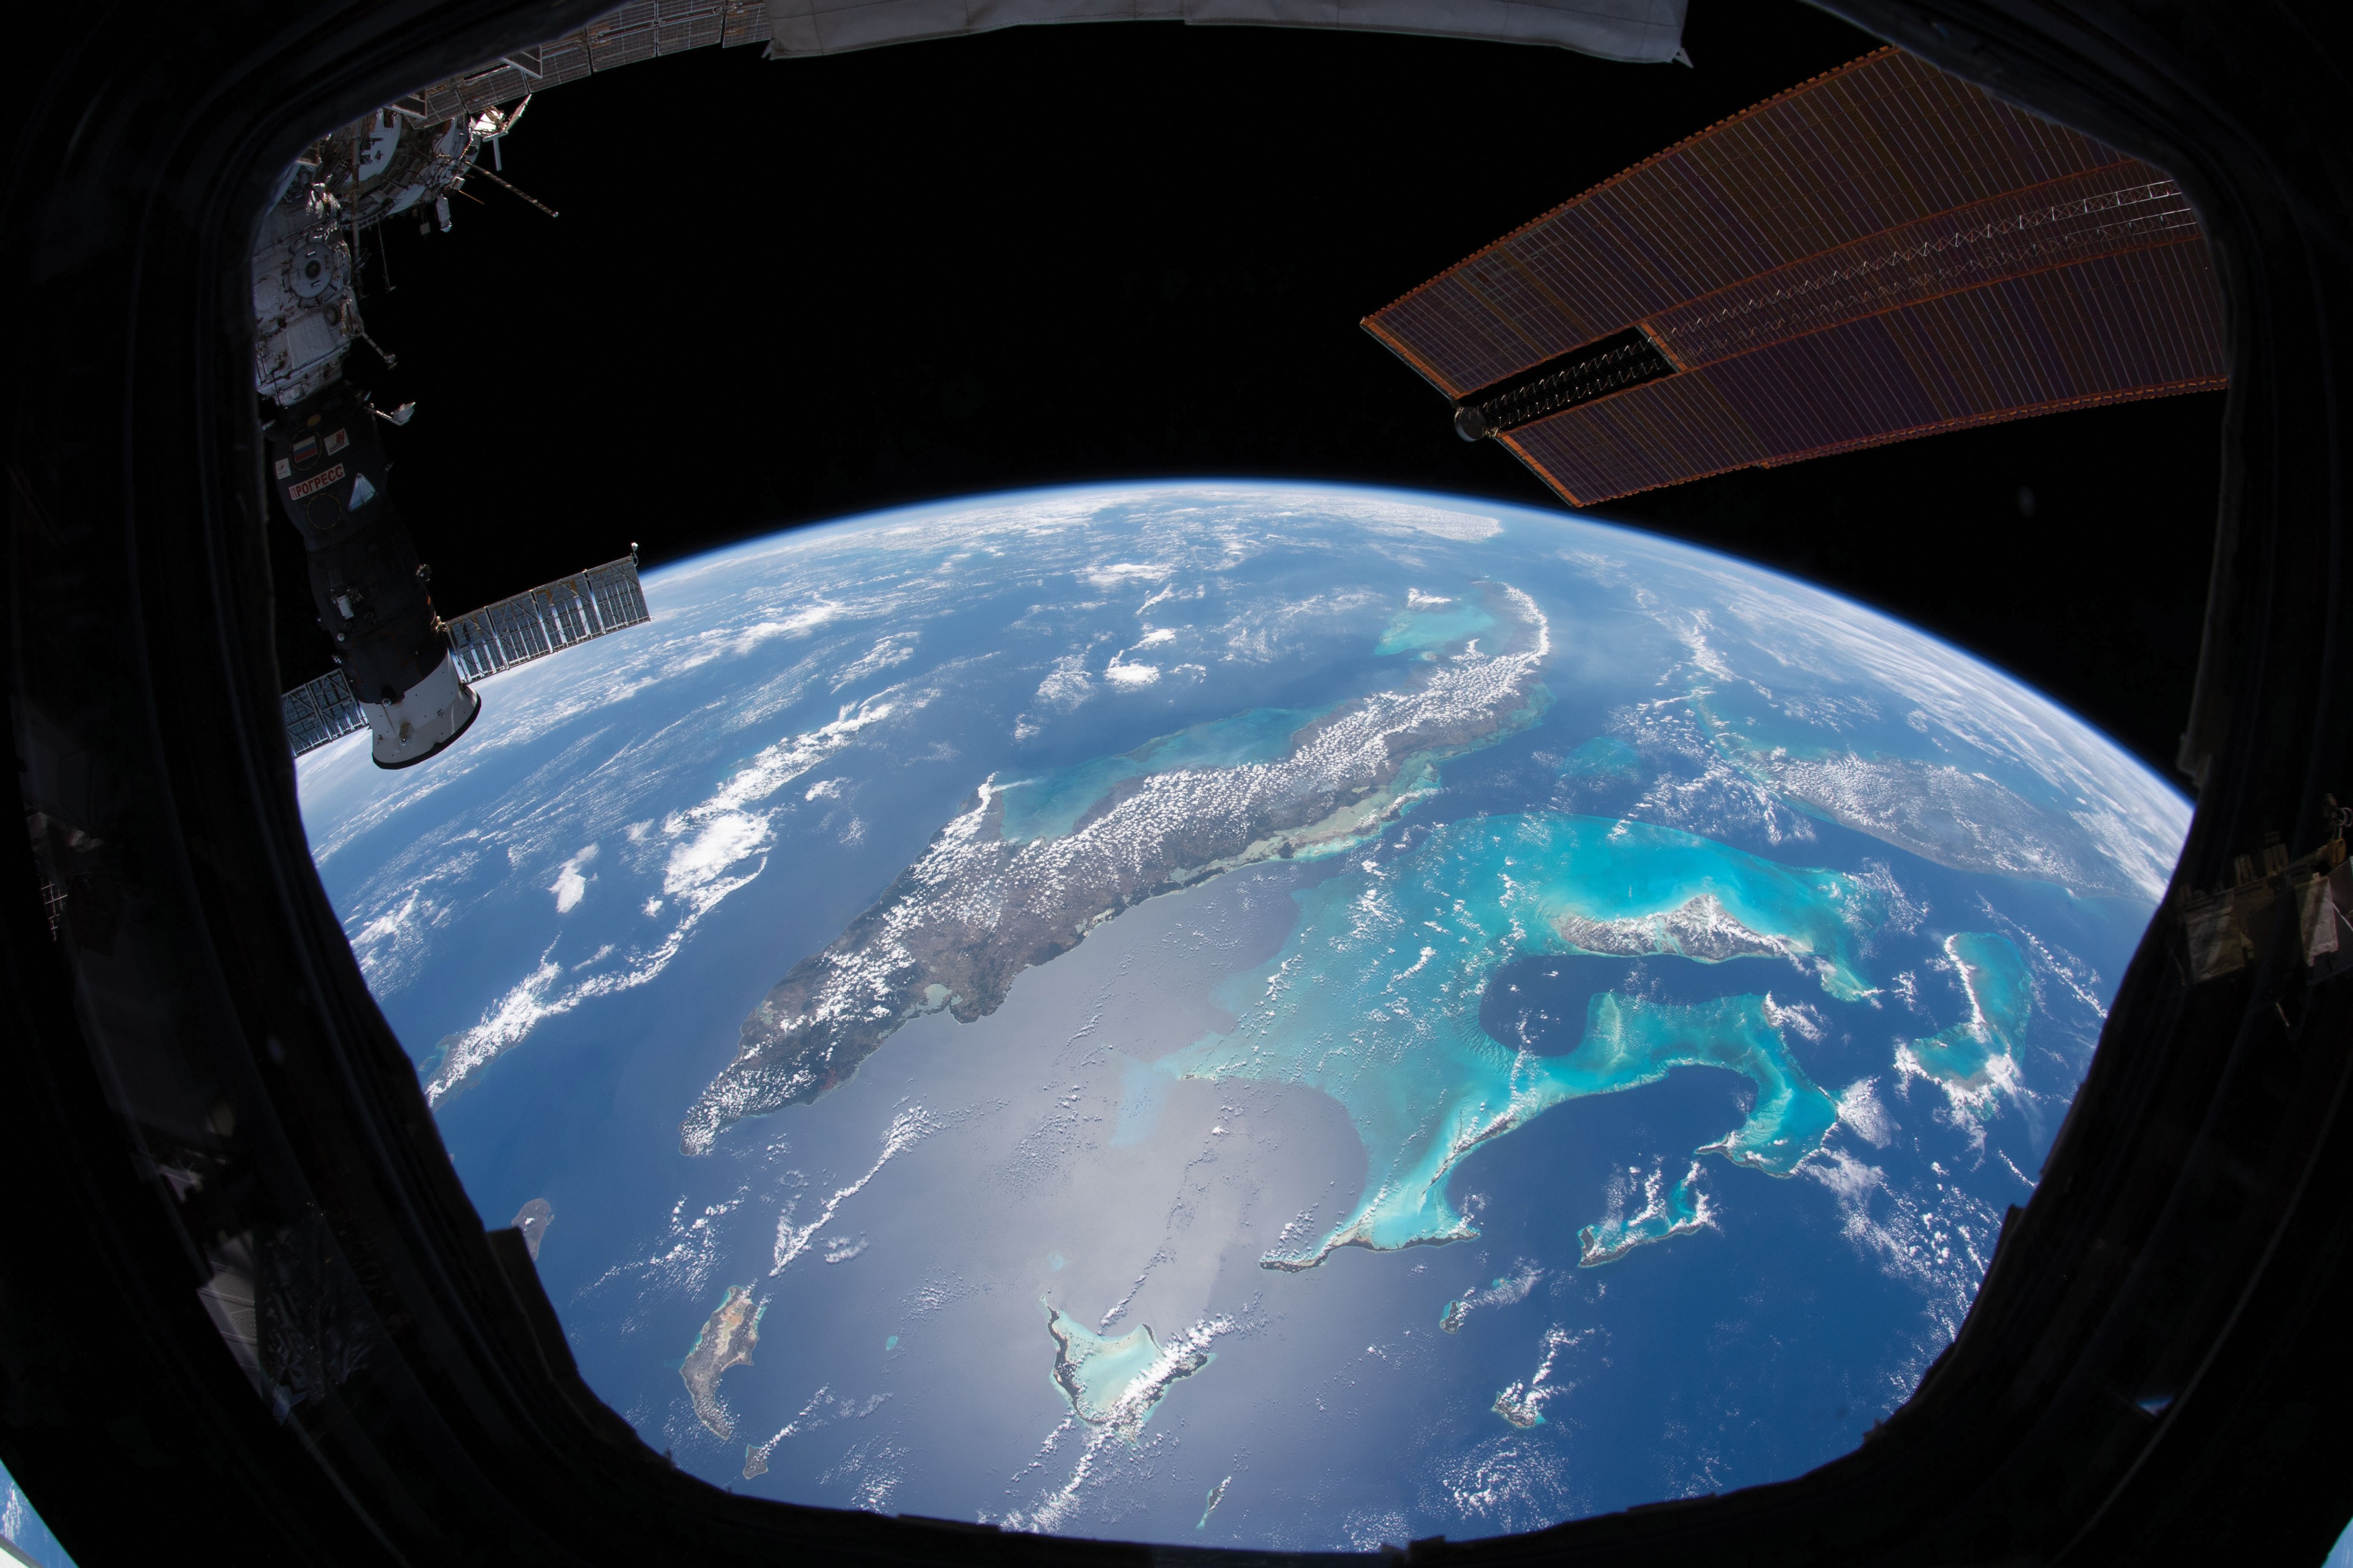 A photo taken from the International Space Station shows the curving horizon of Earth below. In view is a brilliant blue ocean region with islands and small white clouds. Pieces of the station like the solar arrays are visible at the top of the photo.